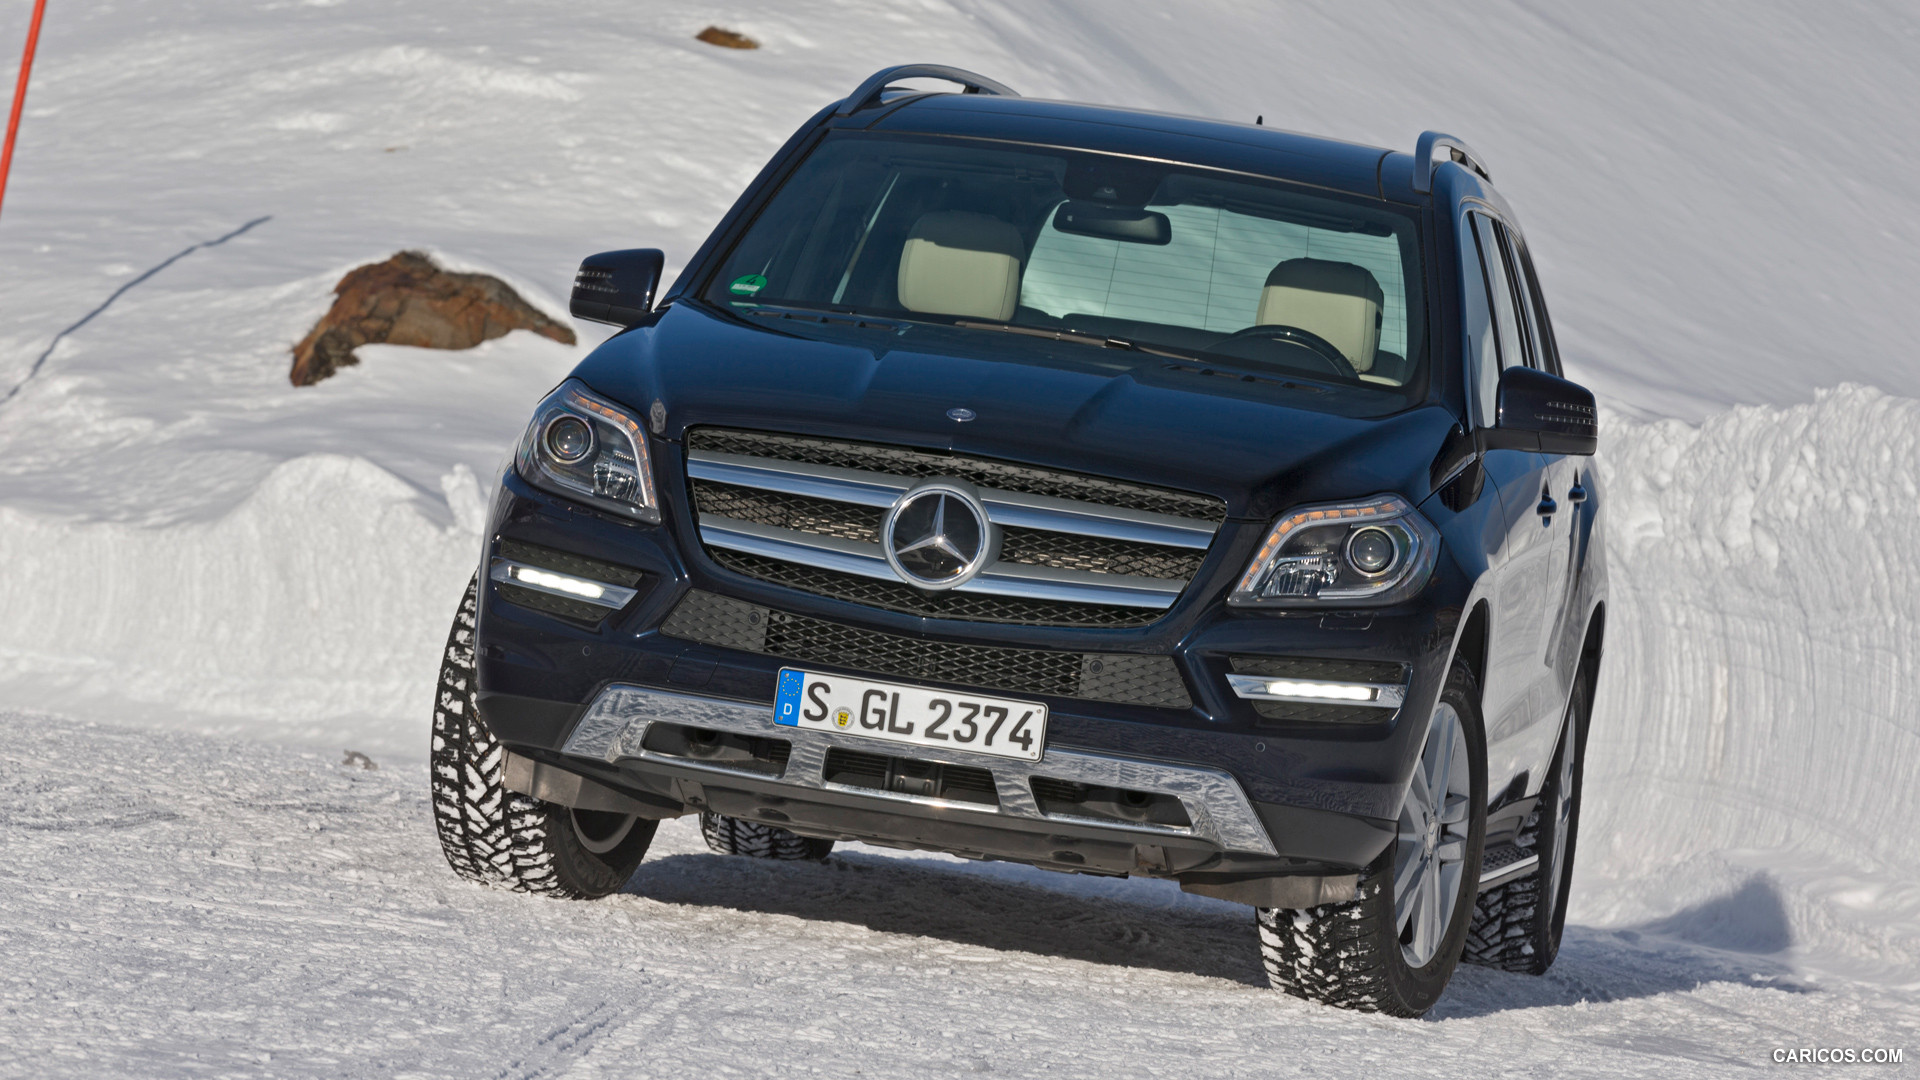 2013 Mercedes-Benz GL 500 4MATIC on Snow - Front, #233 of 259